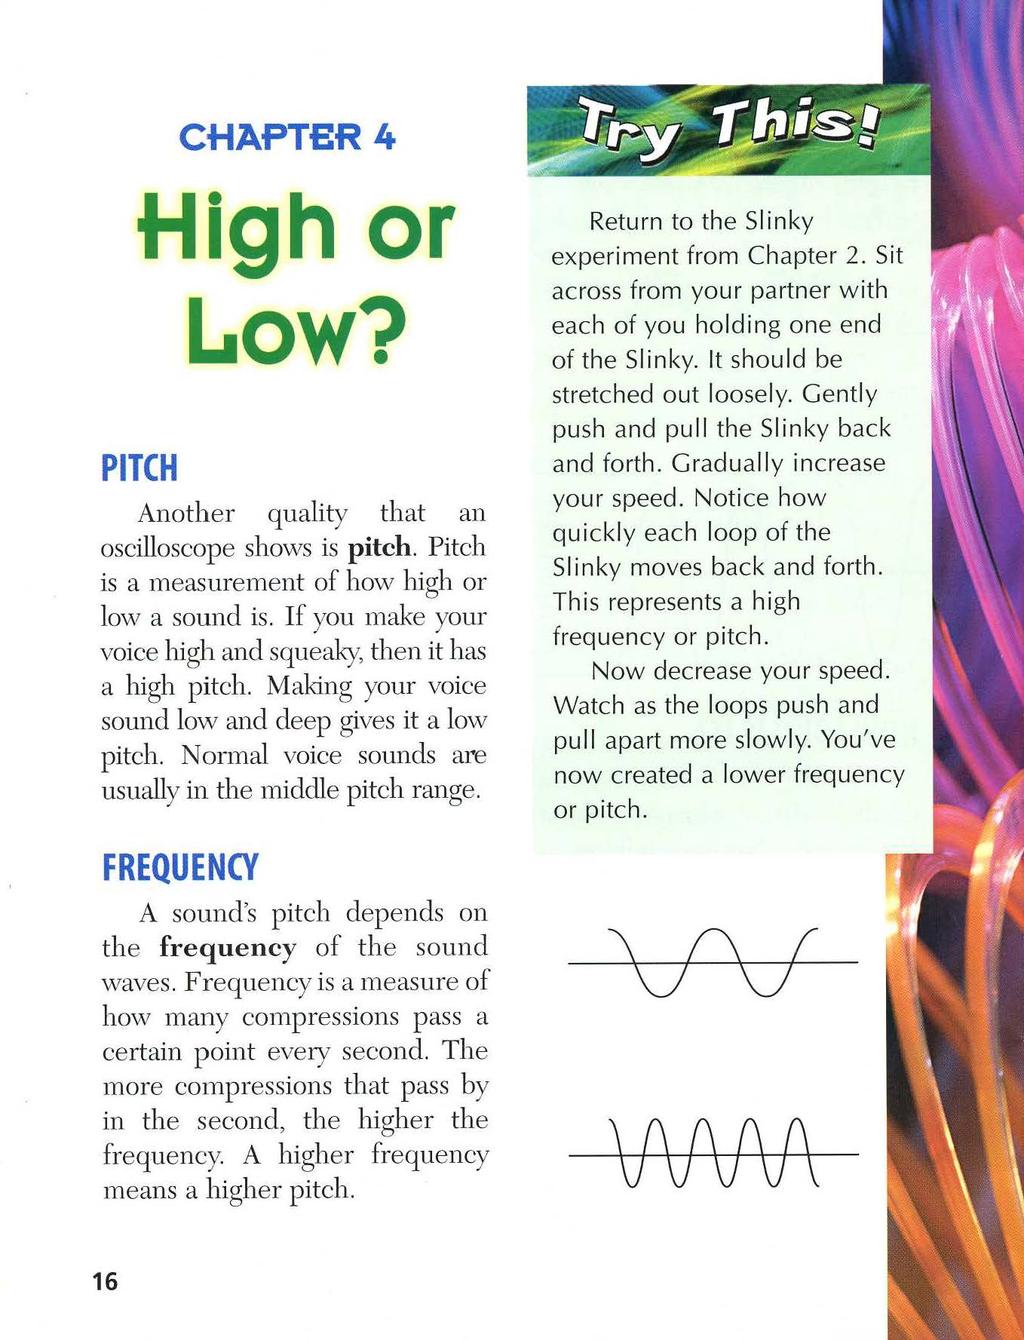 CHAPTER4 High or Low? PITCH Another quality that an oscilloscope shows is pitch. Pitch is a measurement of how high or low a sound is.